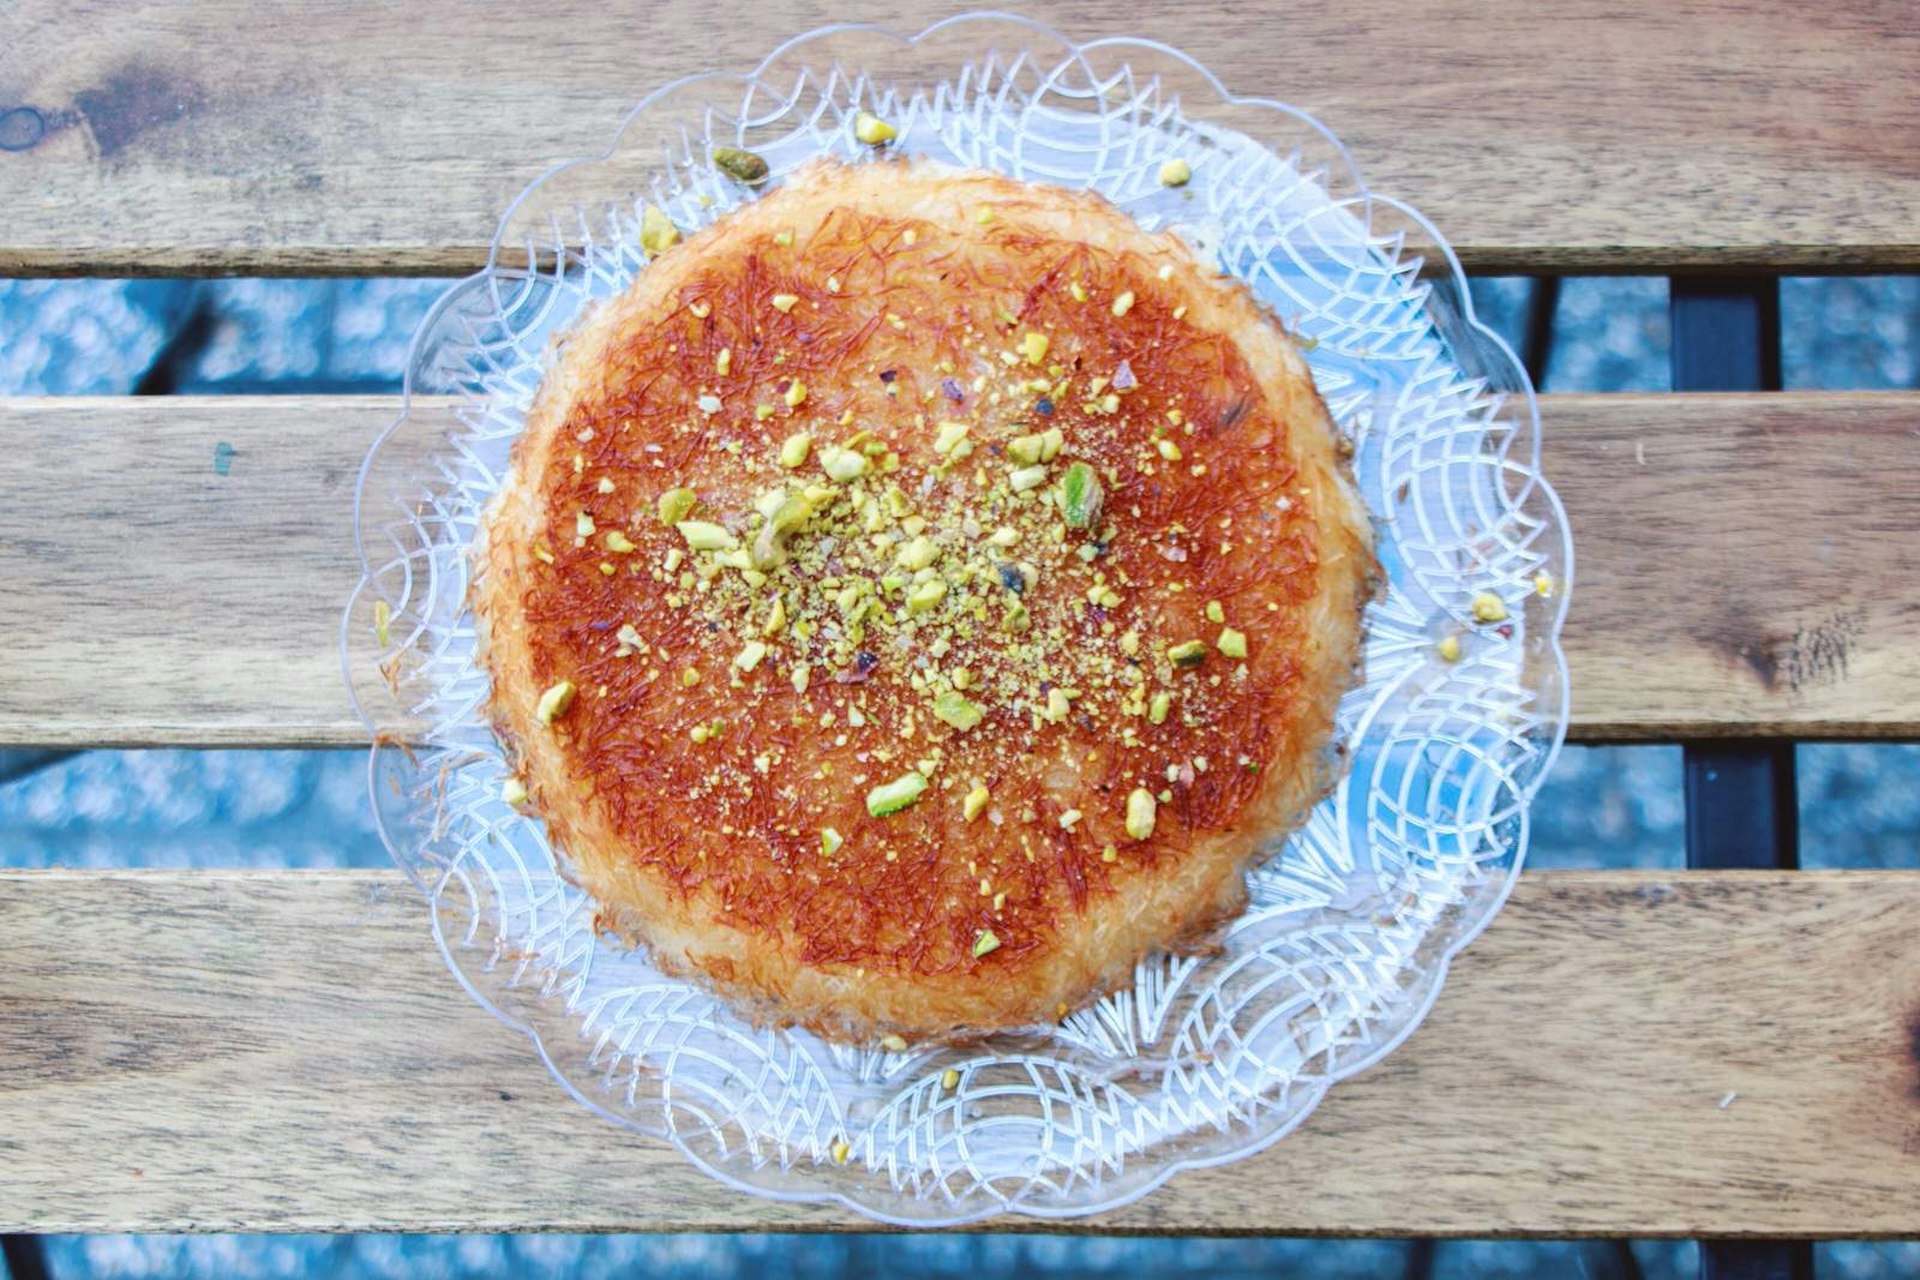 Kunafeh at the newly opened Atir Dessert has already gained a following. Image by Bassel Masannat / Lonely Planet